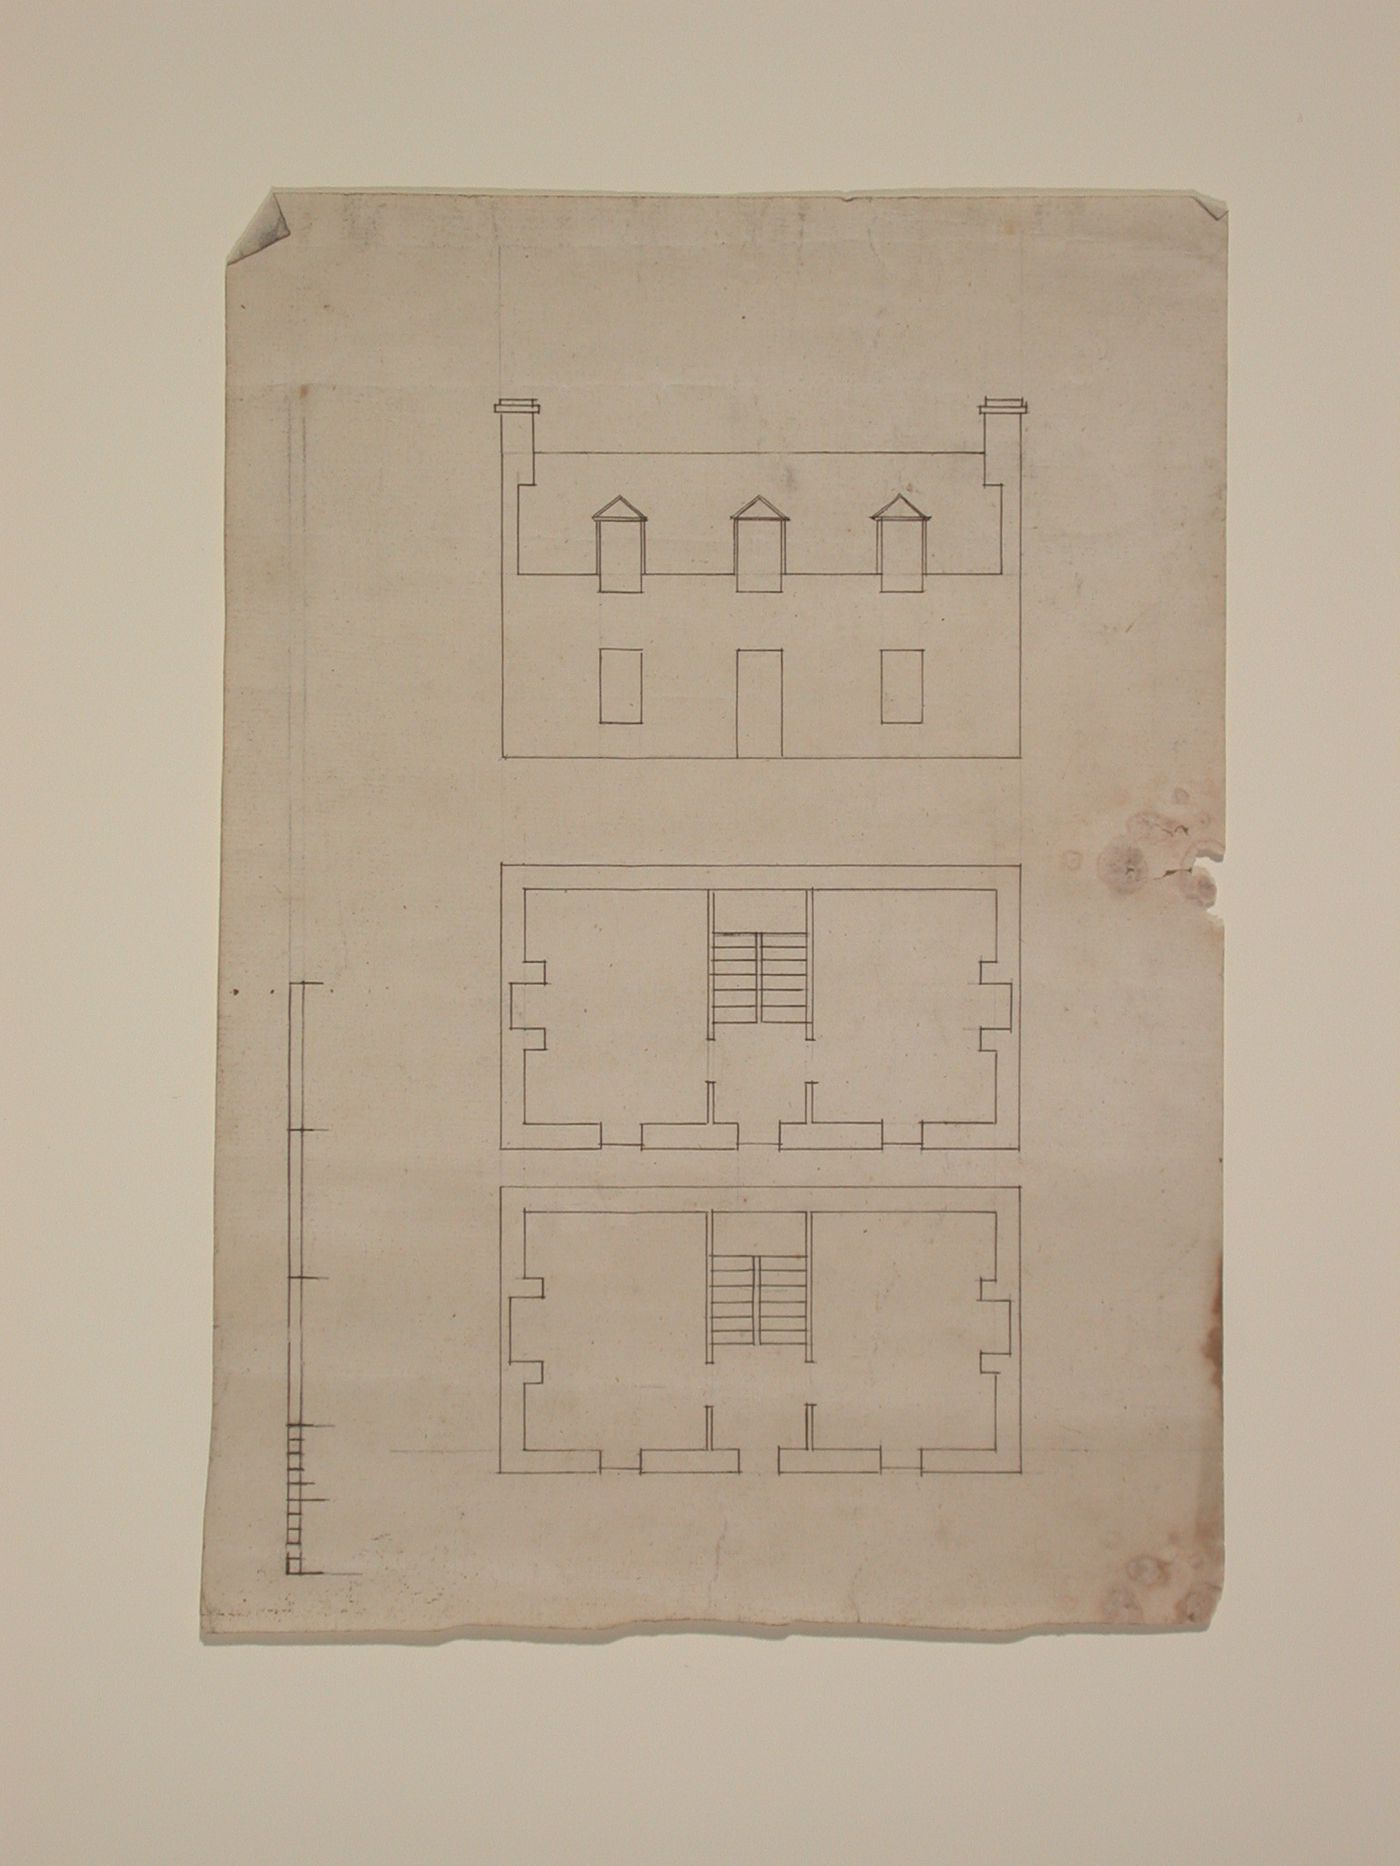 Ground and first floor plans and elevation for a house